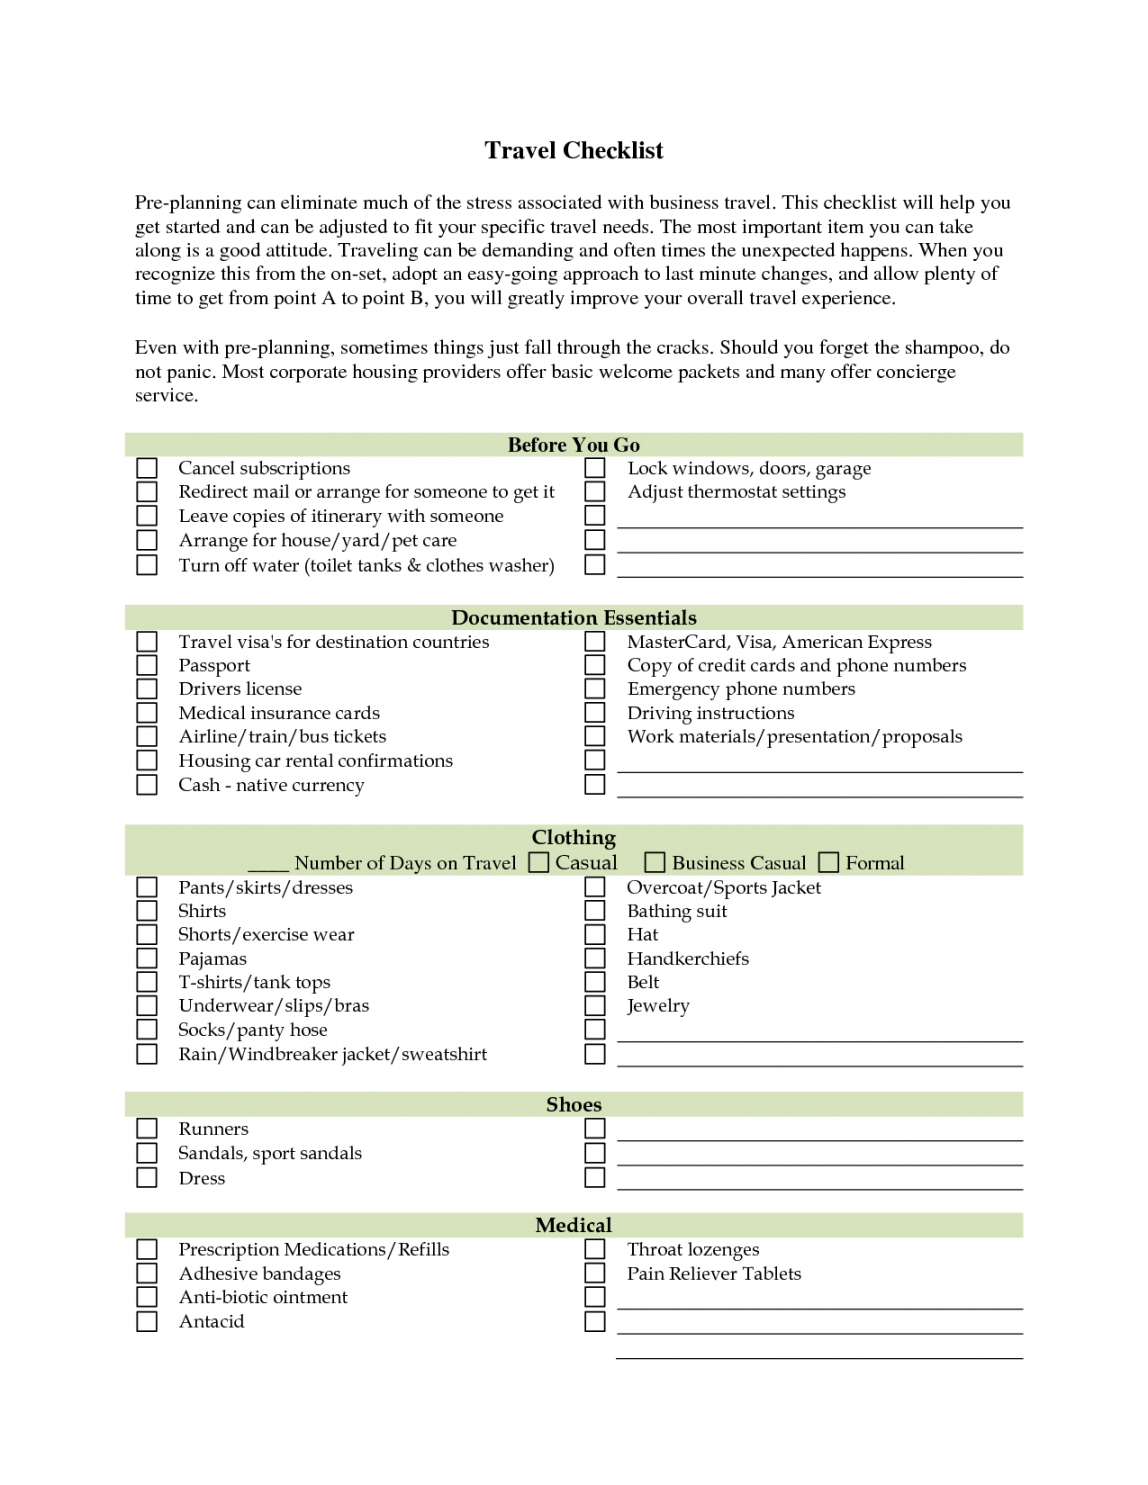 business travel checklist example of travellers generic for trip pdf business travel checklist template samples